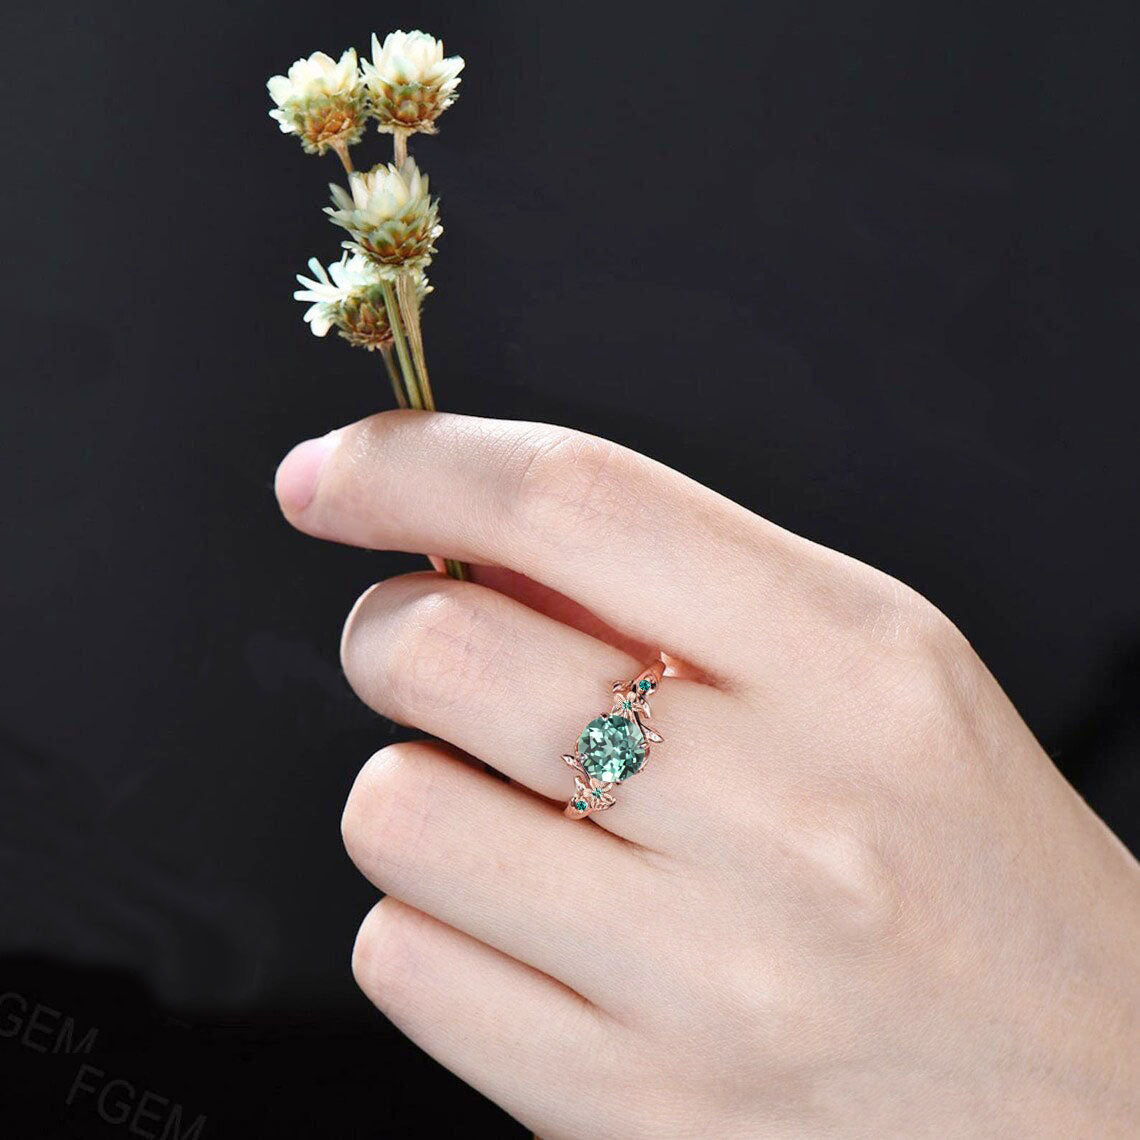 Nature Inspired Round Green Sapphire Floral Wedding Ring Green Emerald Ring Branch Promise Ring Unique Graduation/Anniversary Gifts